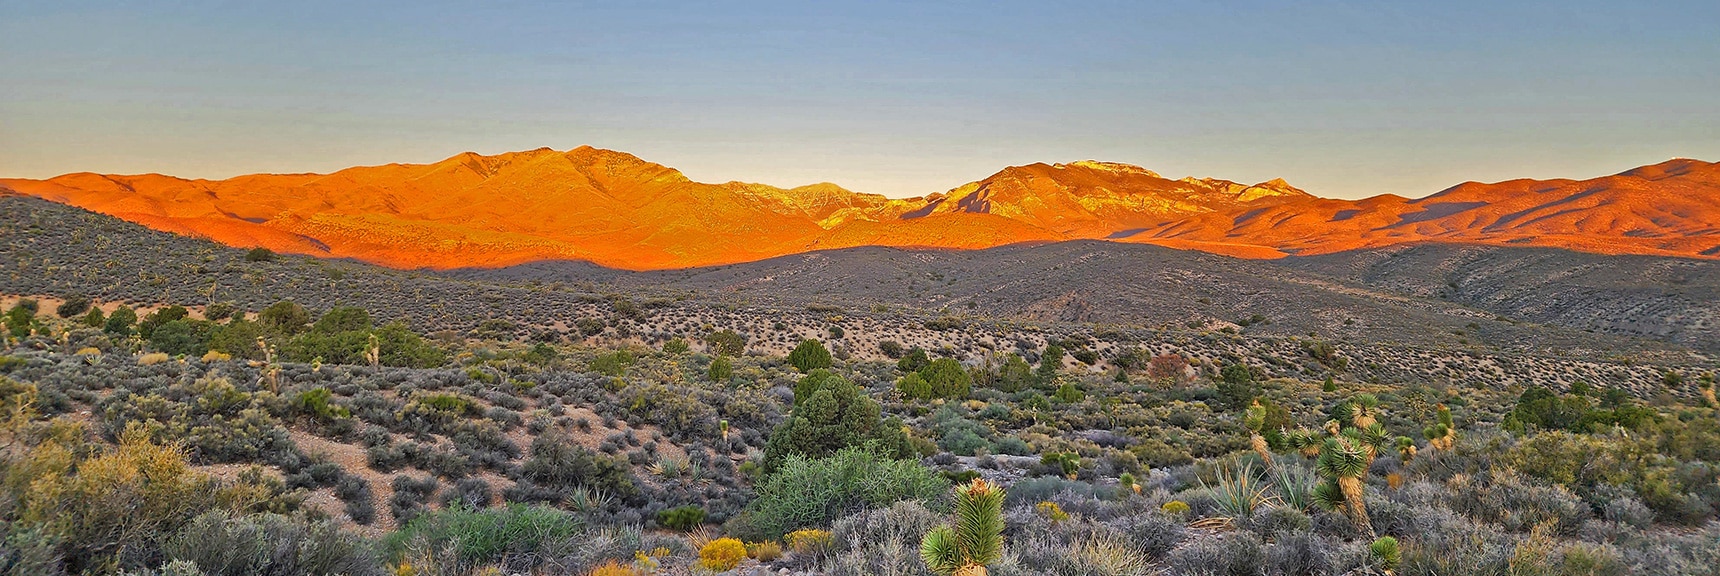 Mt Charleston Continues to Change Color in the Rising Sun | Kyle Canyon Grand Crossing | Northern Half | La Madre Mountains Wilderness, Nevada